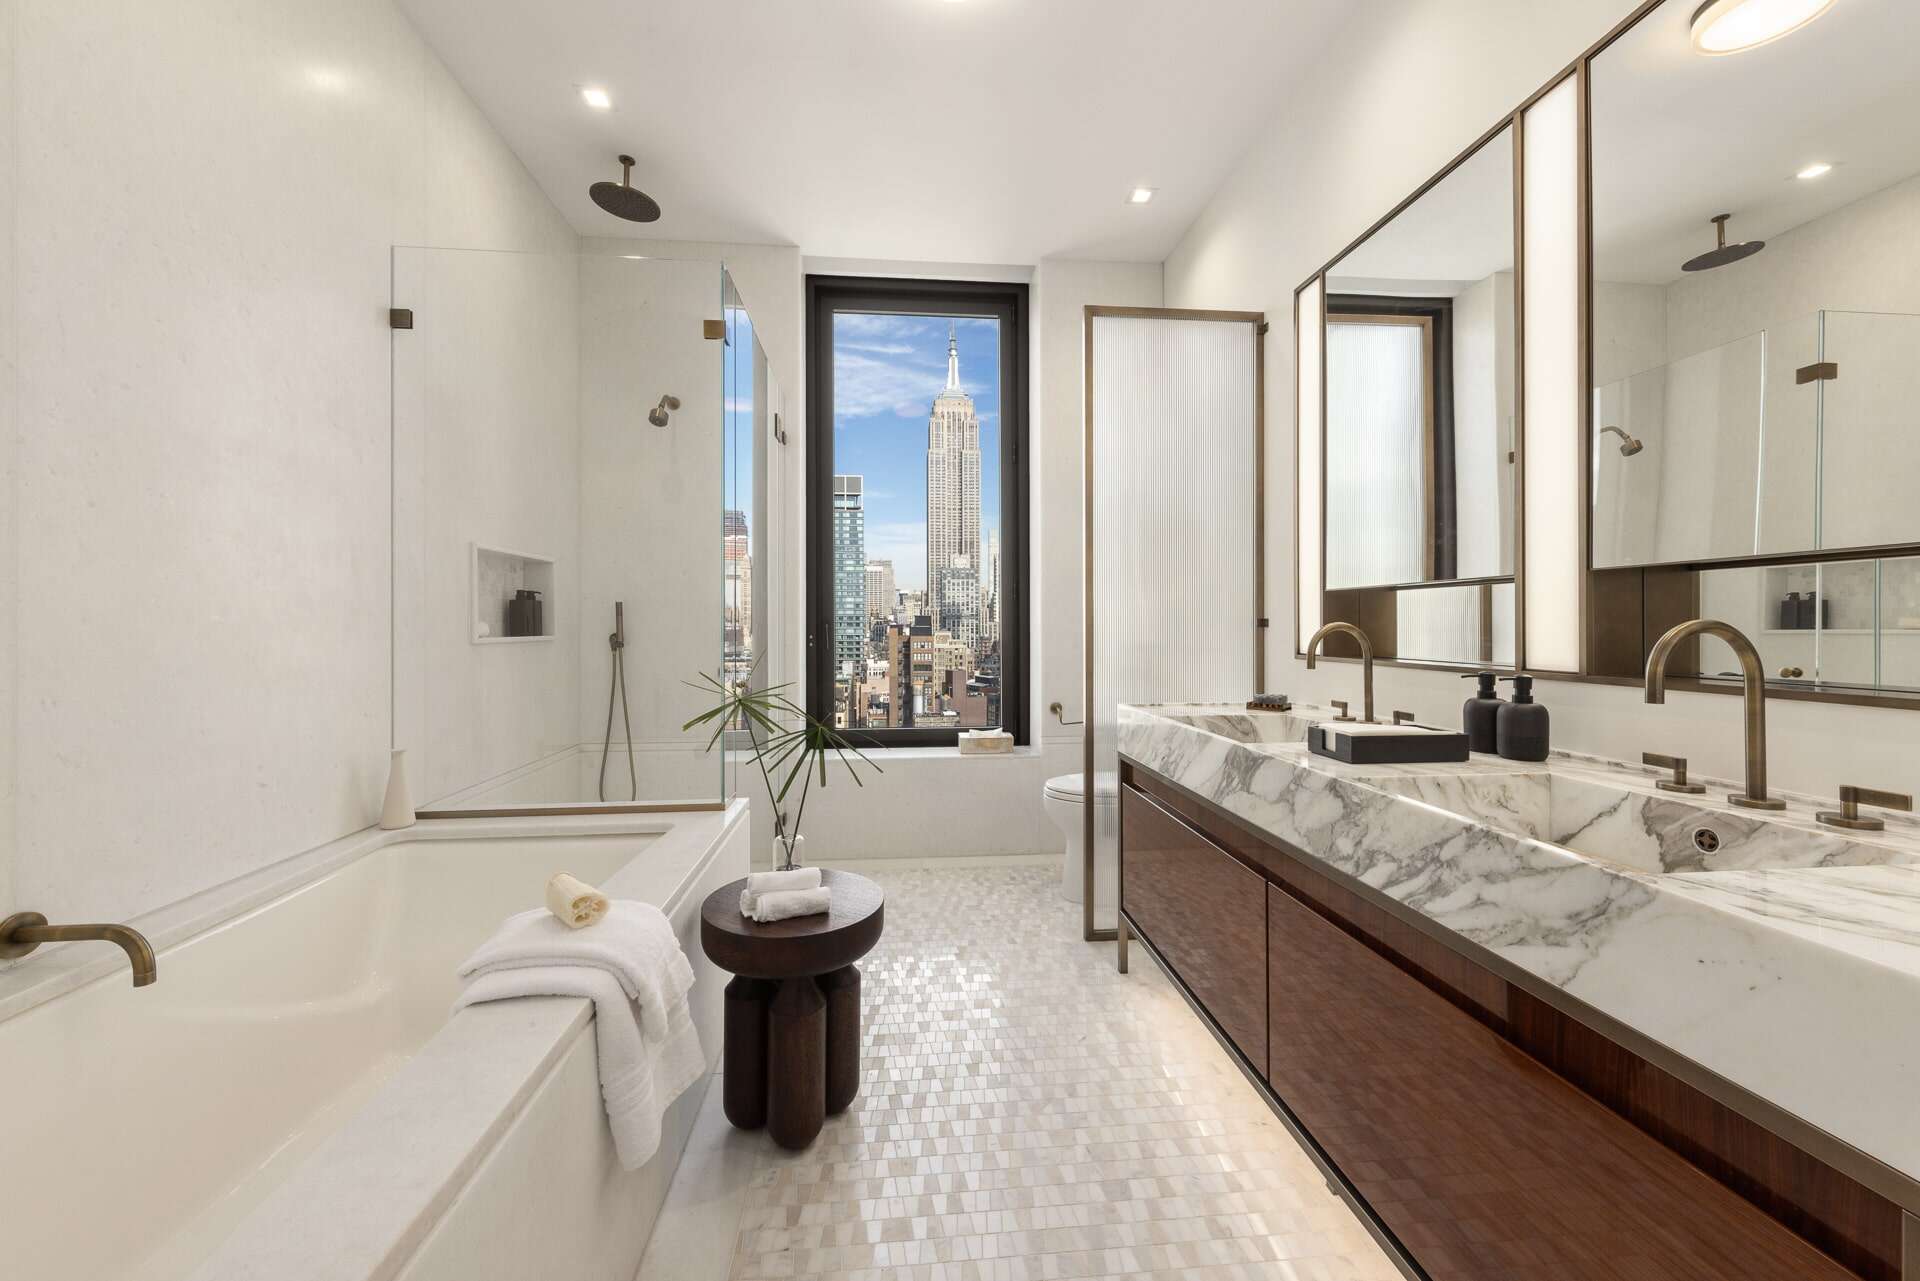 Interior shot of the ensuite bathroom, with the Empire State Building in the background. 